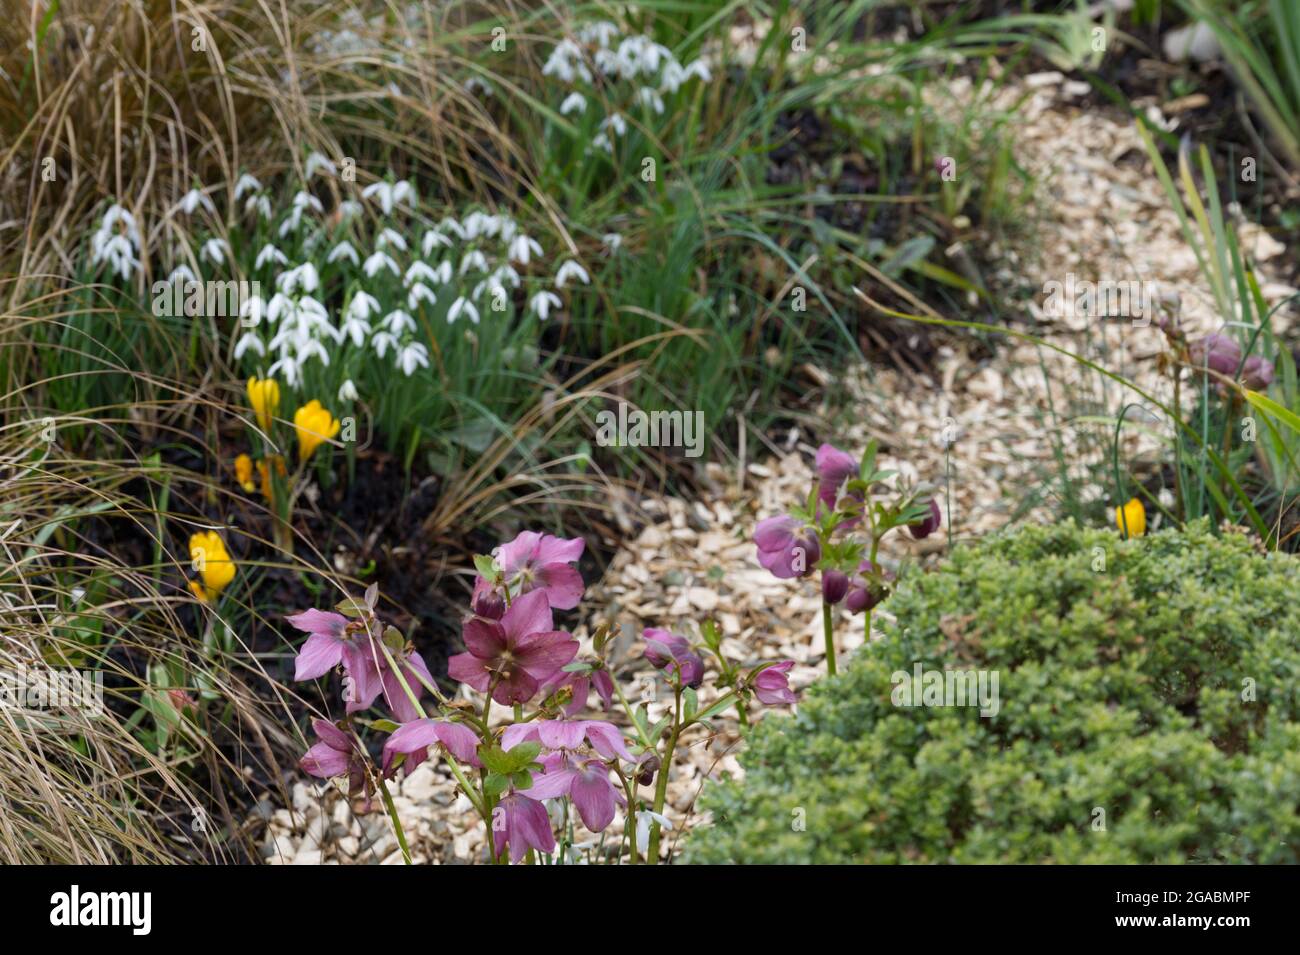 Winter flowers, crocus snowdrops and pink hellebore in a garden setting February UK Stock Photo